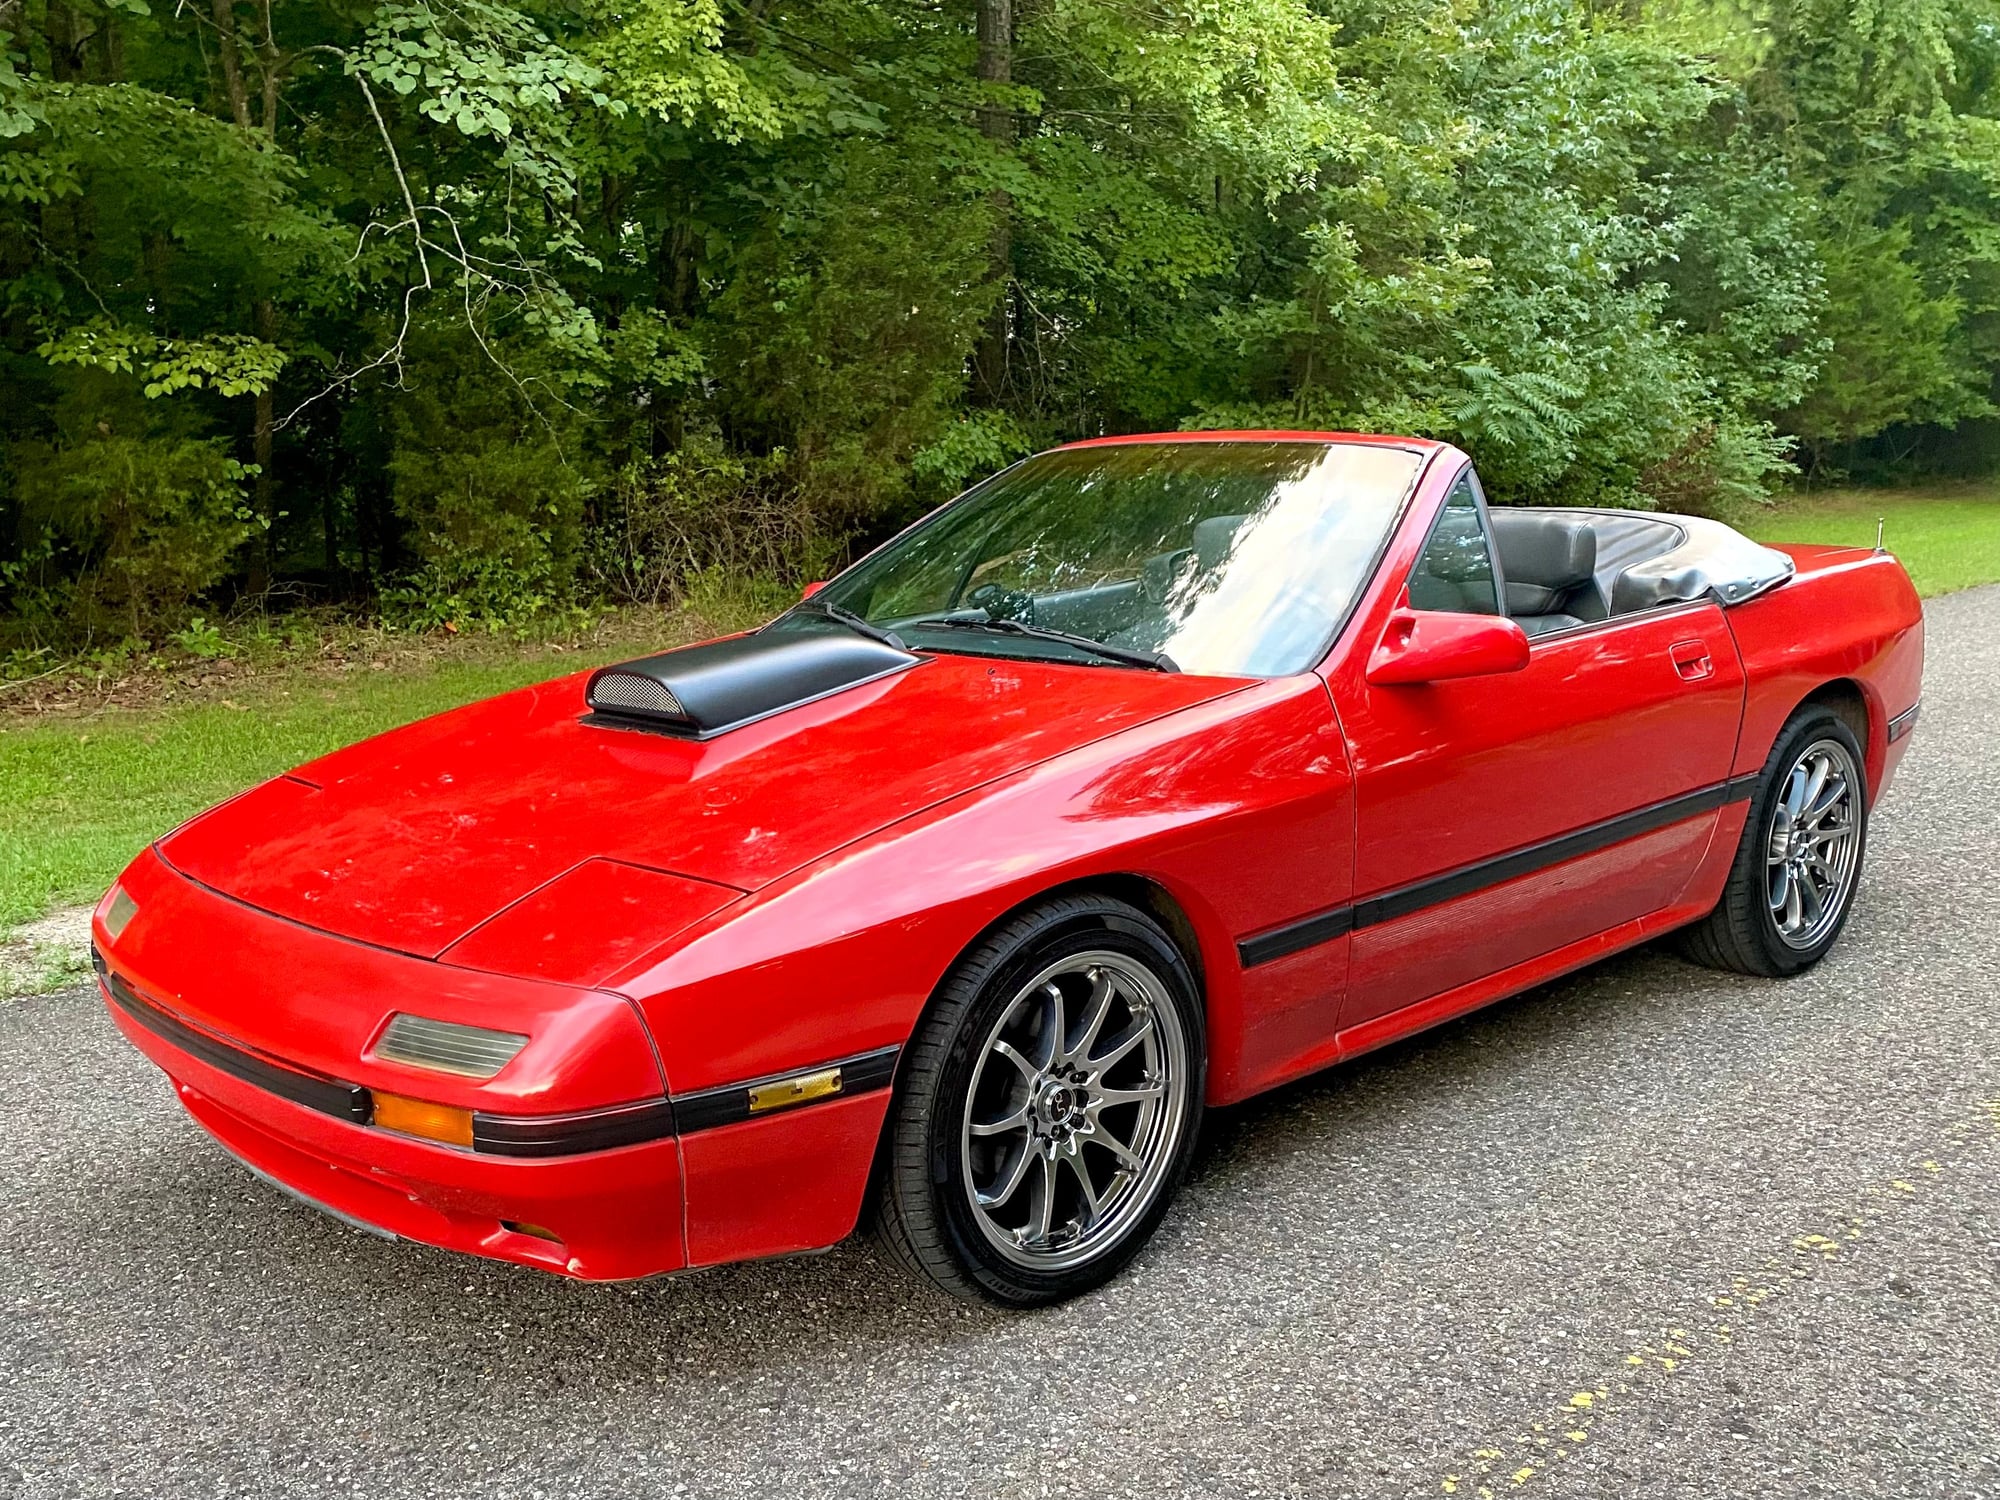 1988 Mazda RX-7 - FS in Alabama: Clean SBC Swapped FC Convertible - Used - VIN 01010101010101010 - 8 cyl - 2WD - Automatic - Convertible - Red - Elkmont, AL 35620, United States